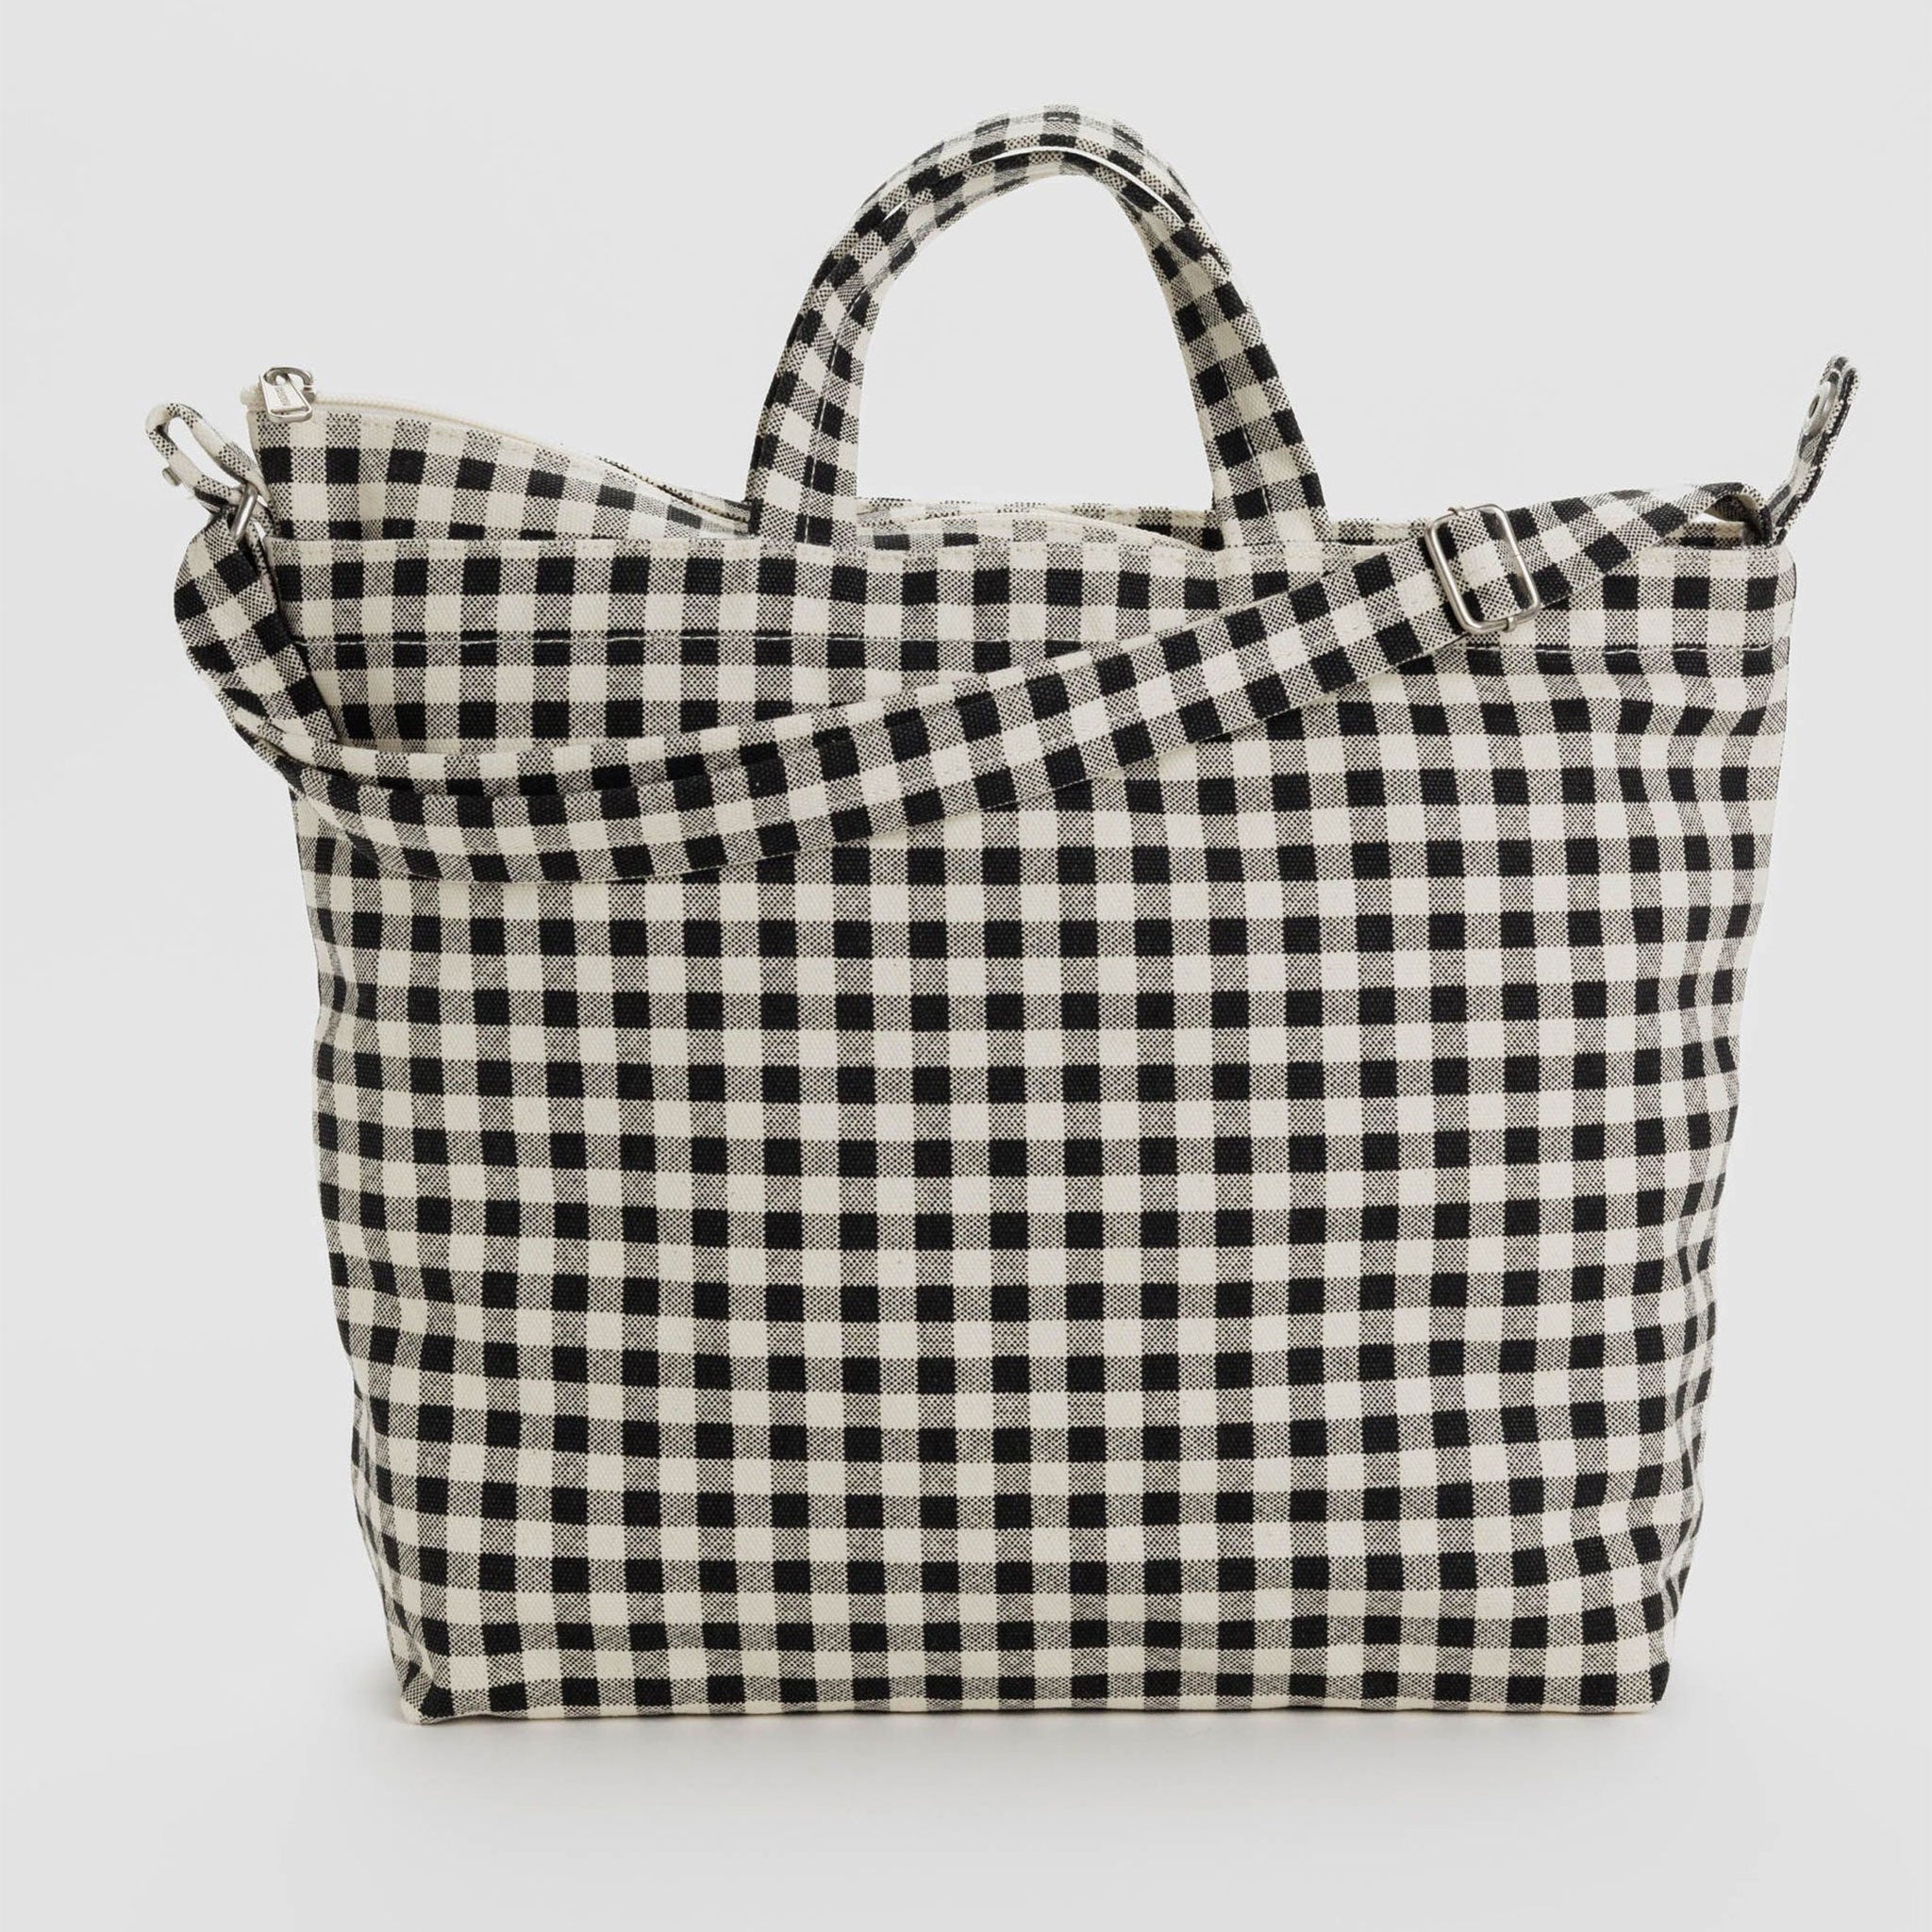 On a white background is a black and white gingham printed canvas bag with a hand strap and a longer adjustable shoulder strap. 